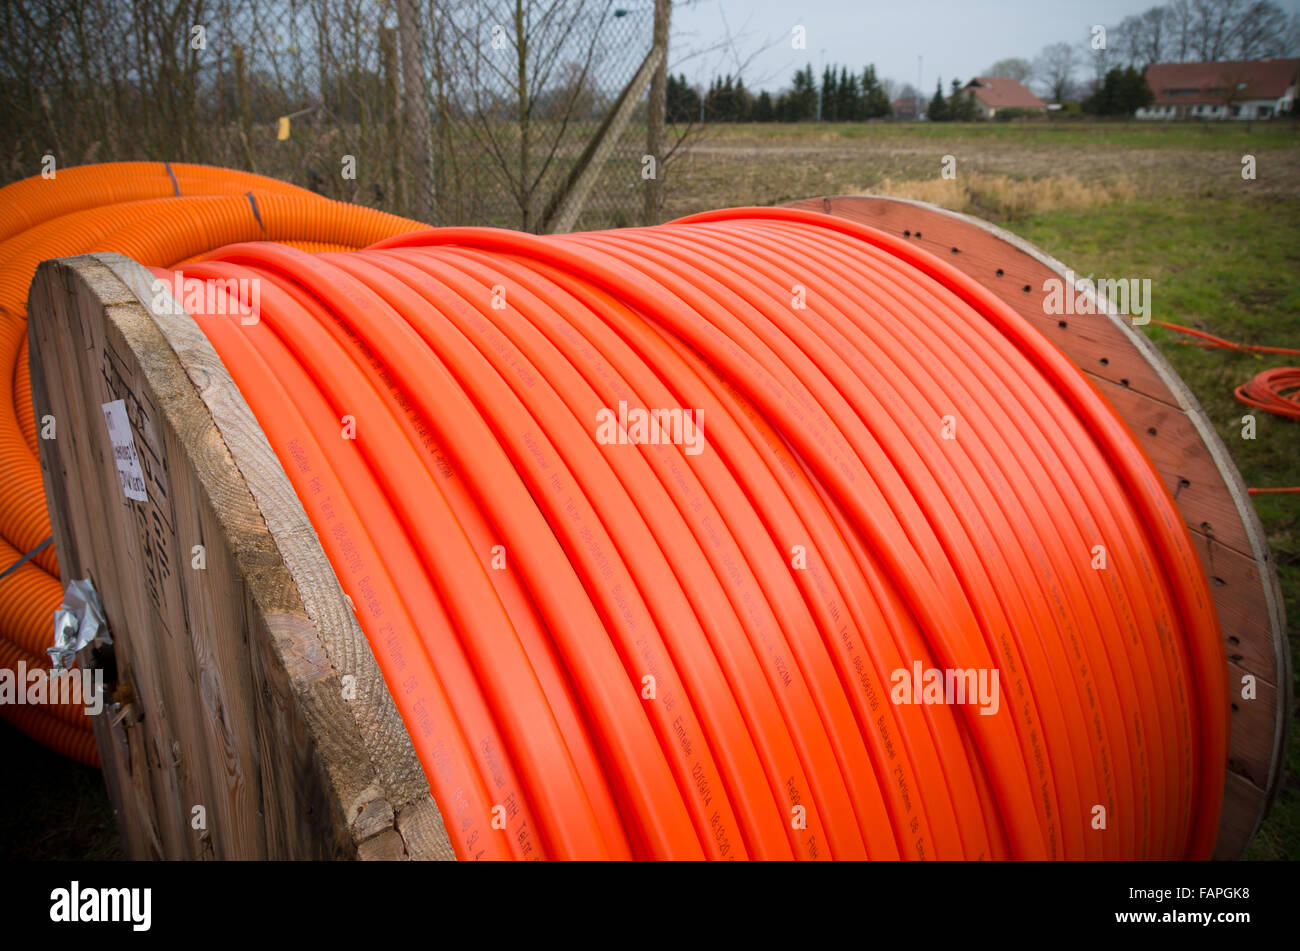 HENGELO, NETHERLANDS - MARCH 28, 2015: Drums with orange fiber cable owned by Reggefiber, a Dutch company that specializes in th Stock Photo